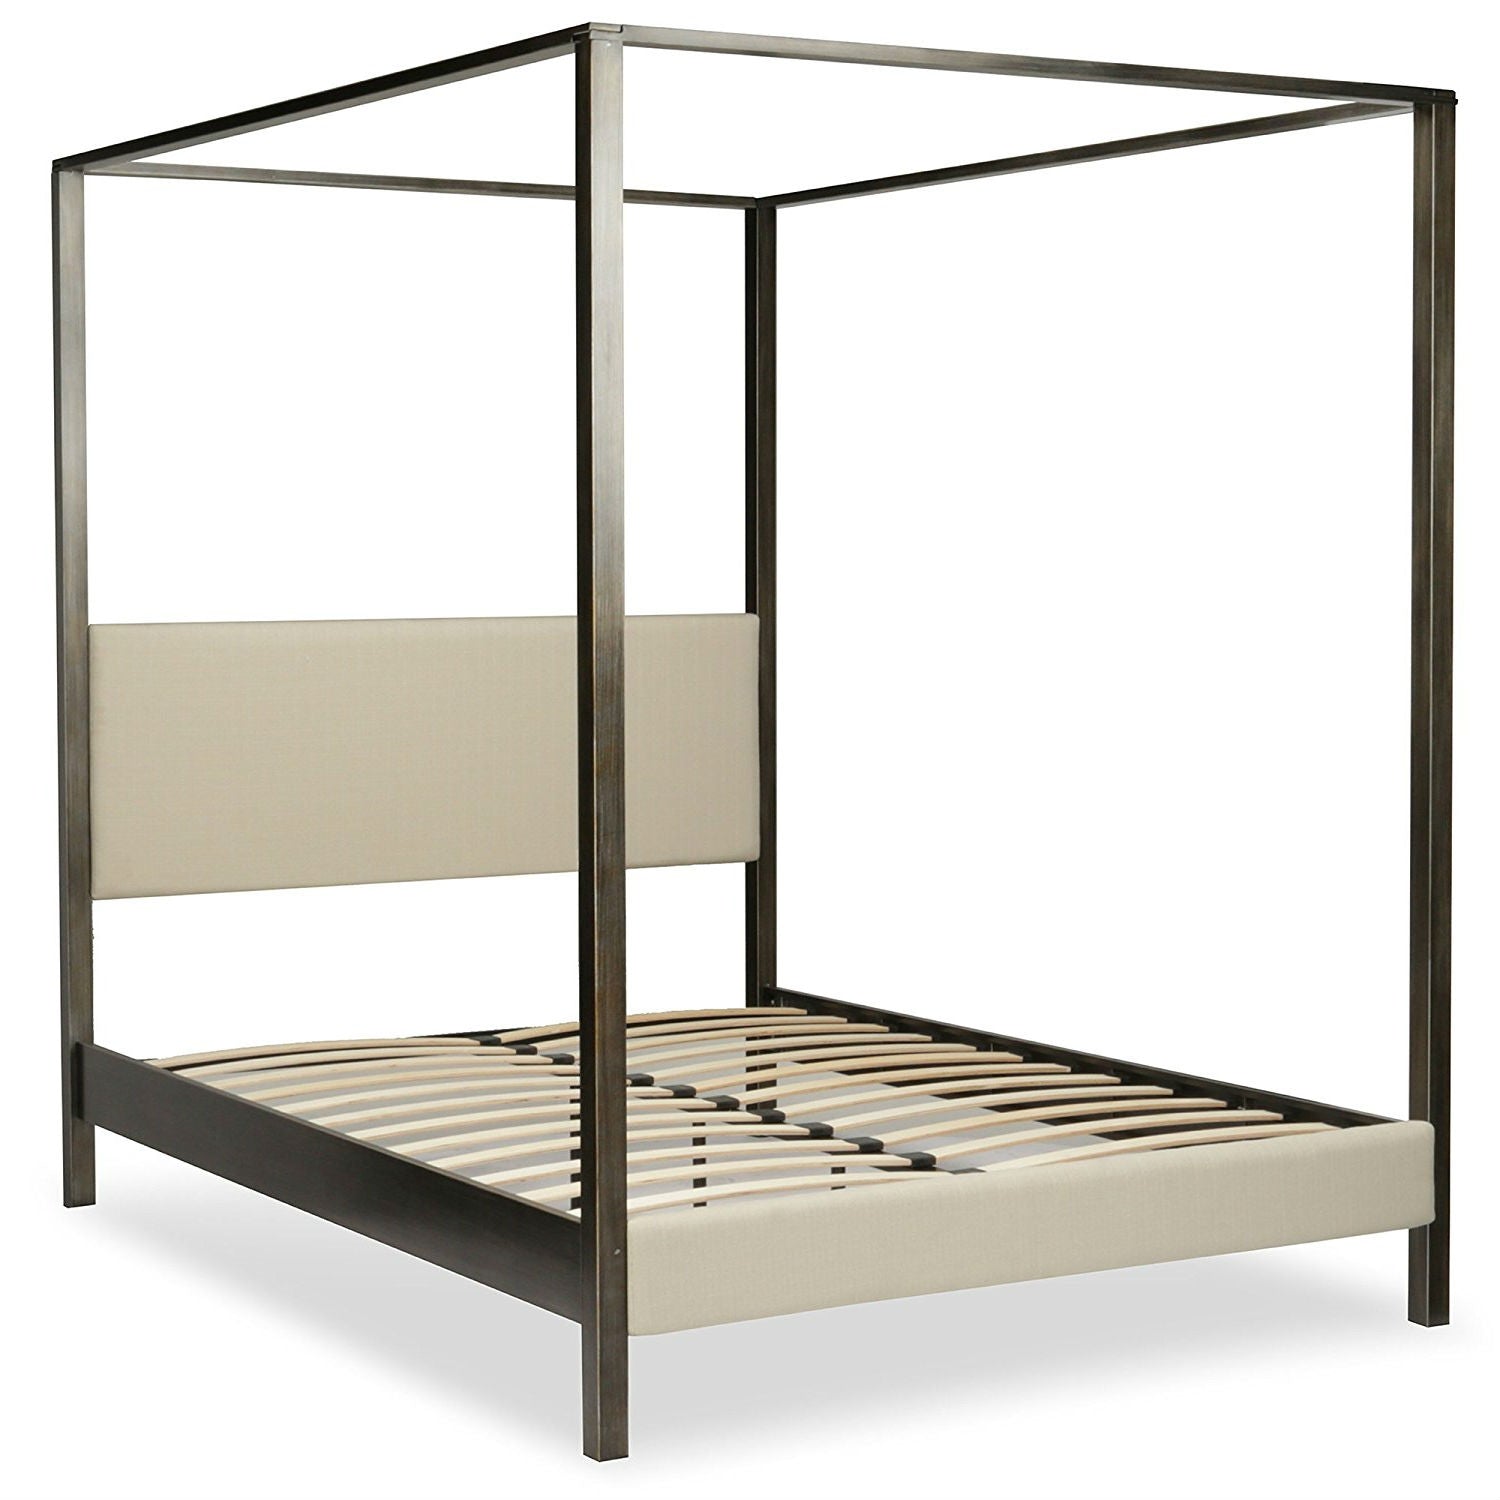 Upholstered Canopy Bed Frame, Wood Canopy Bed Frame California King